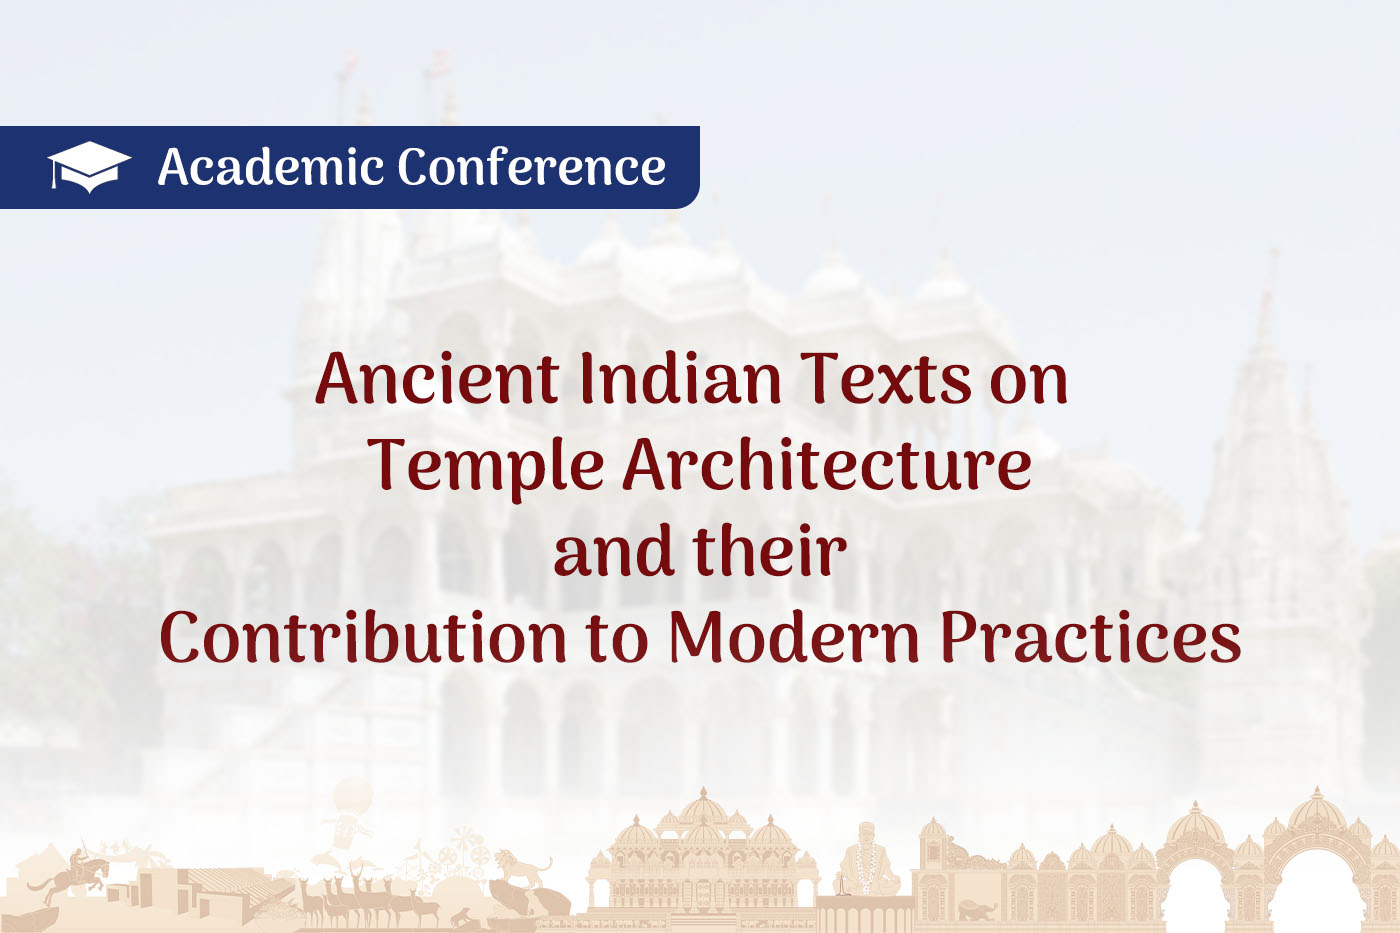 Ancient Indian Texts on Temple Architecture and their Contribution to Modern Practices